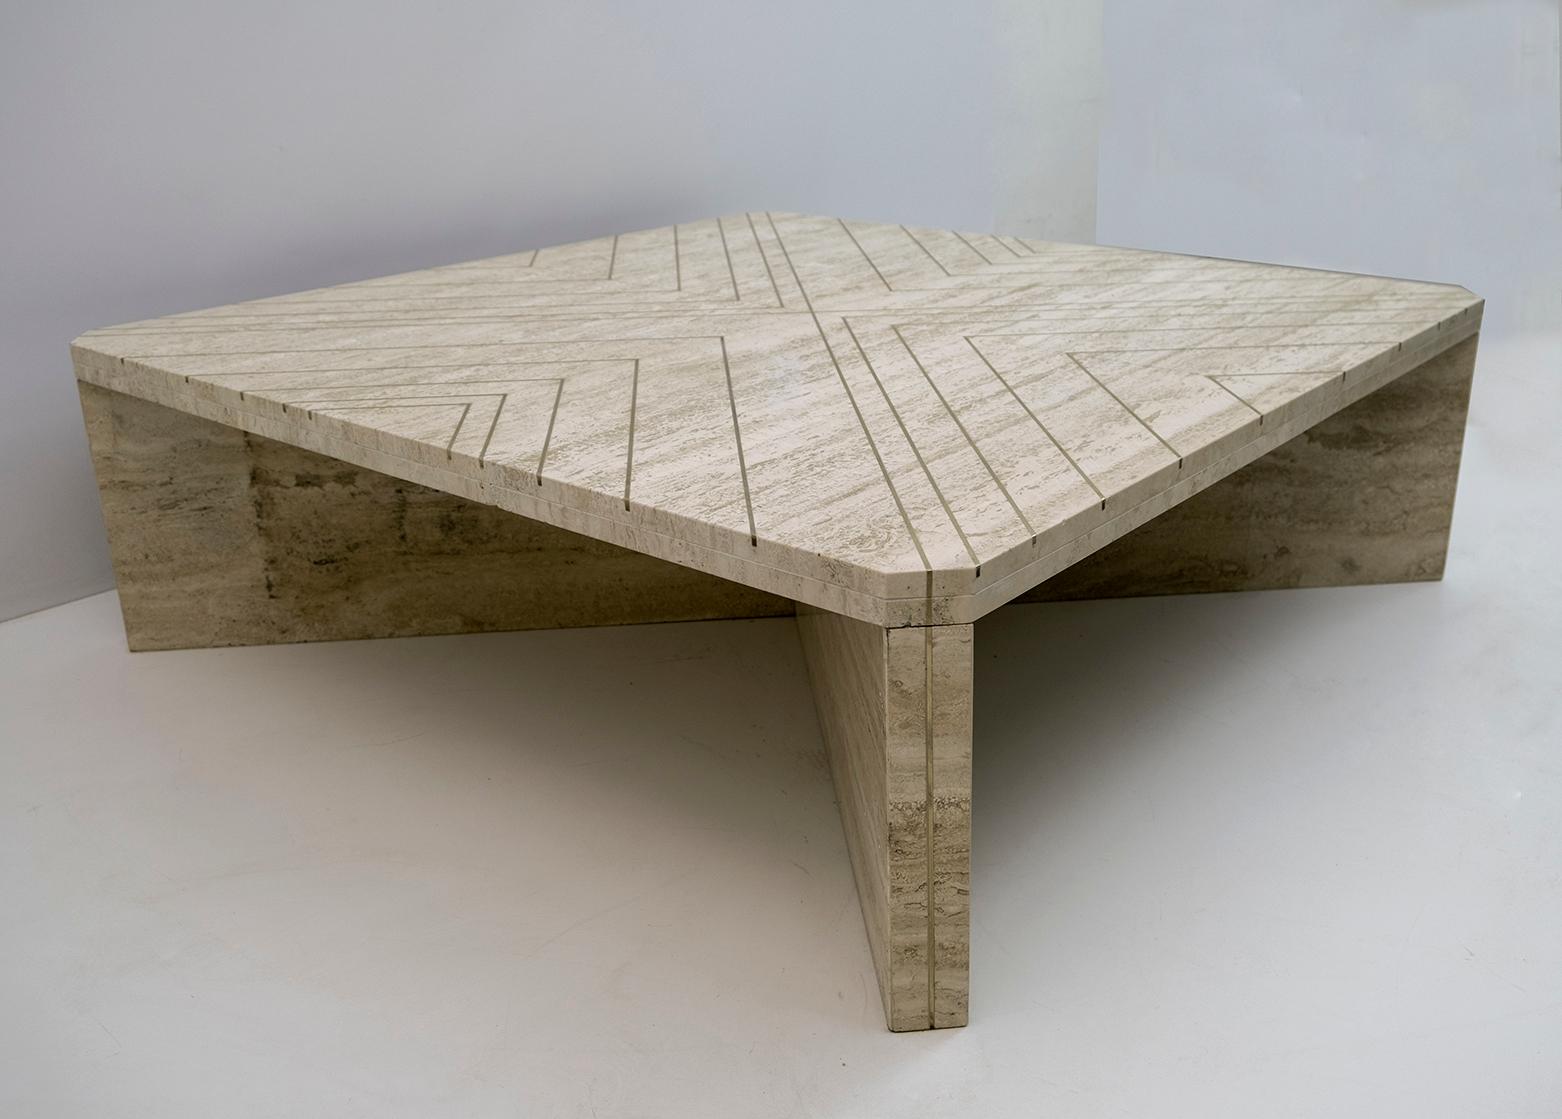 Late 20th Century Mid-Century Italian Travertine Coffee Table with Brass Inlays, 70s For Sale